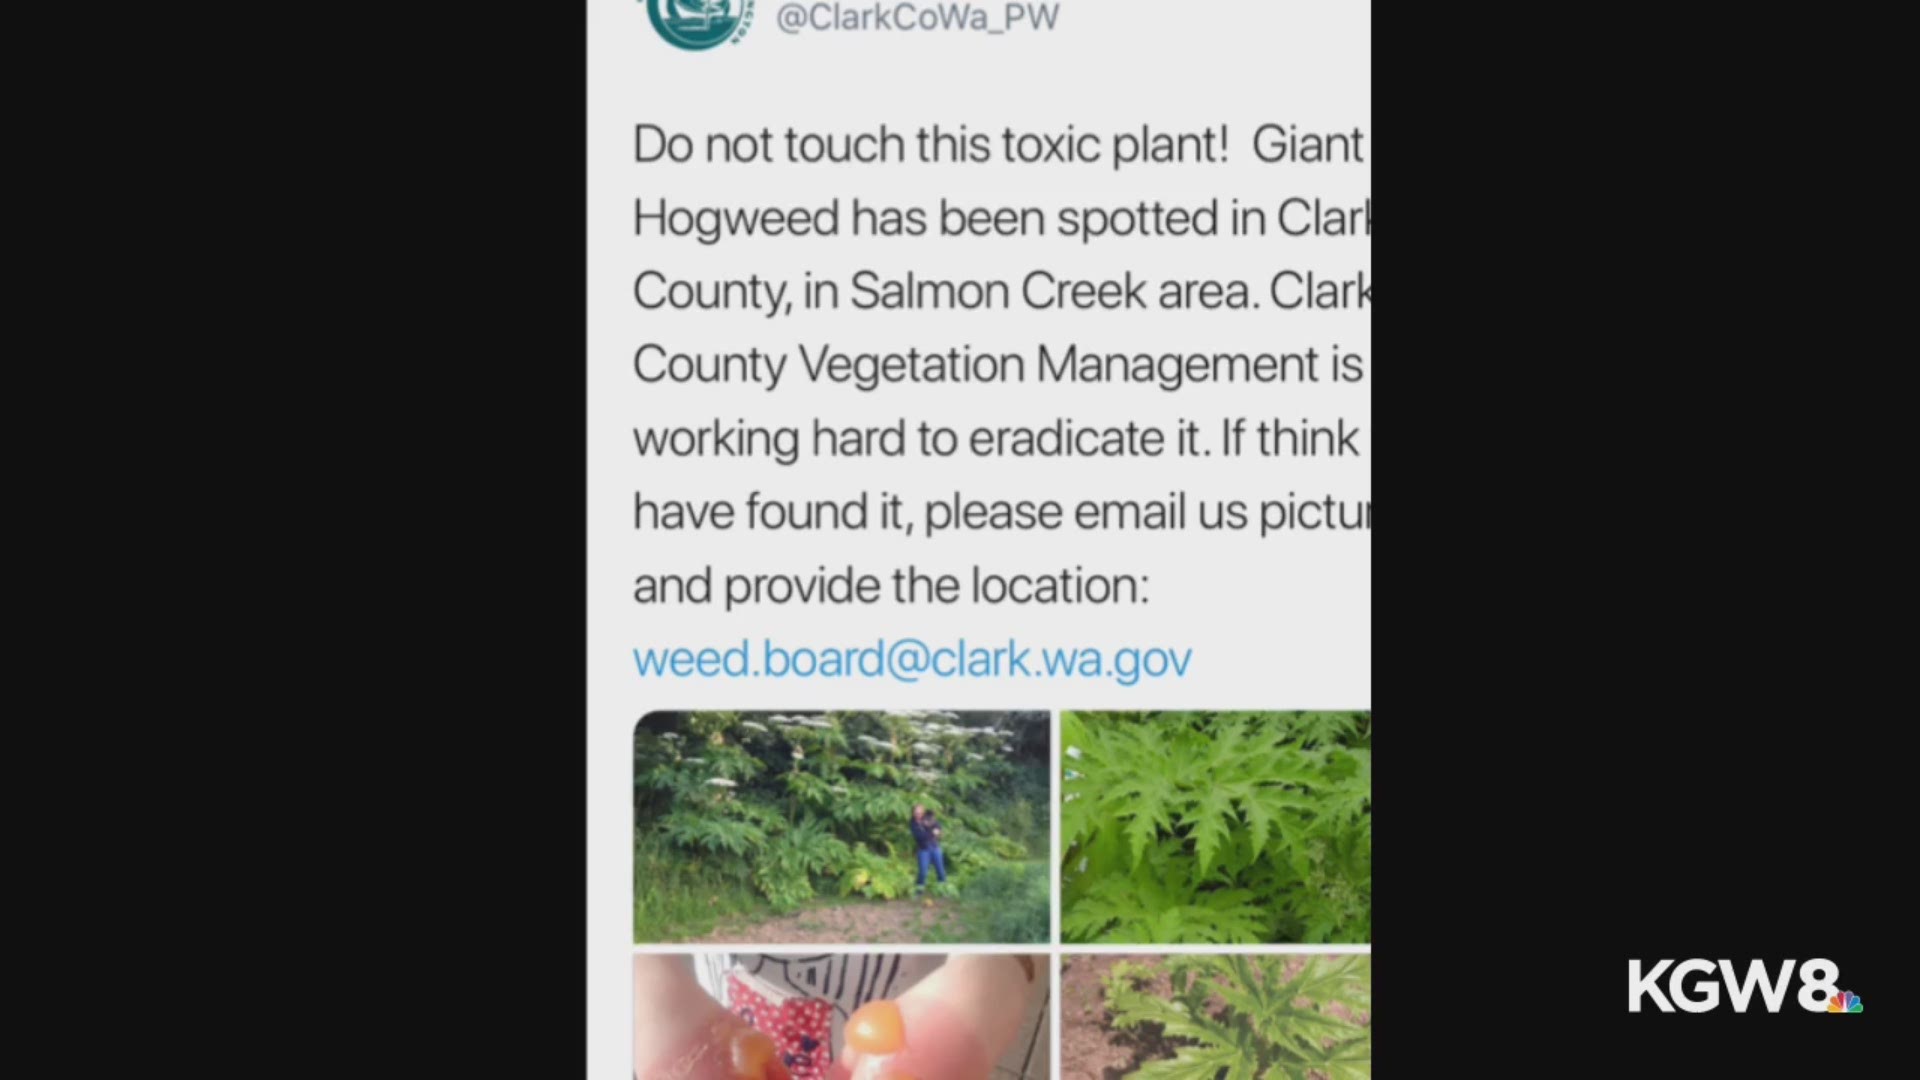 The toxic plant was spotted in Clark County, Washington.